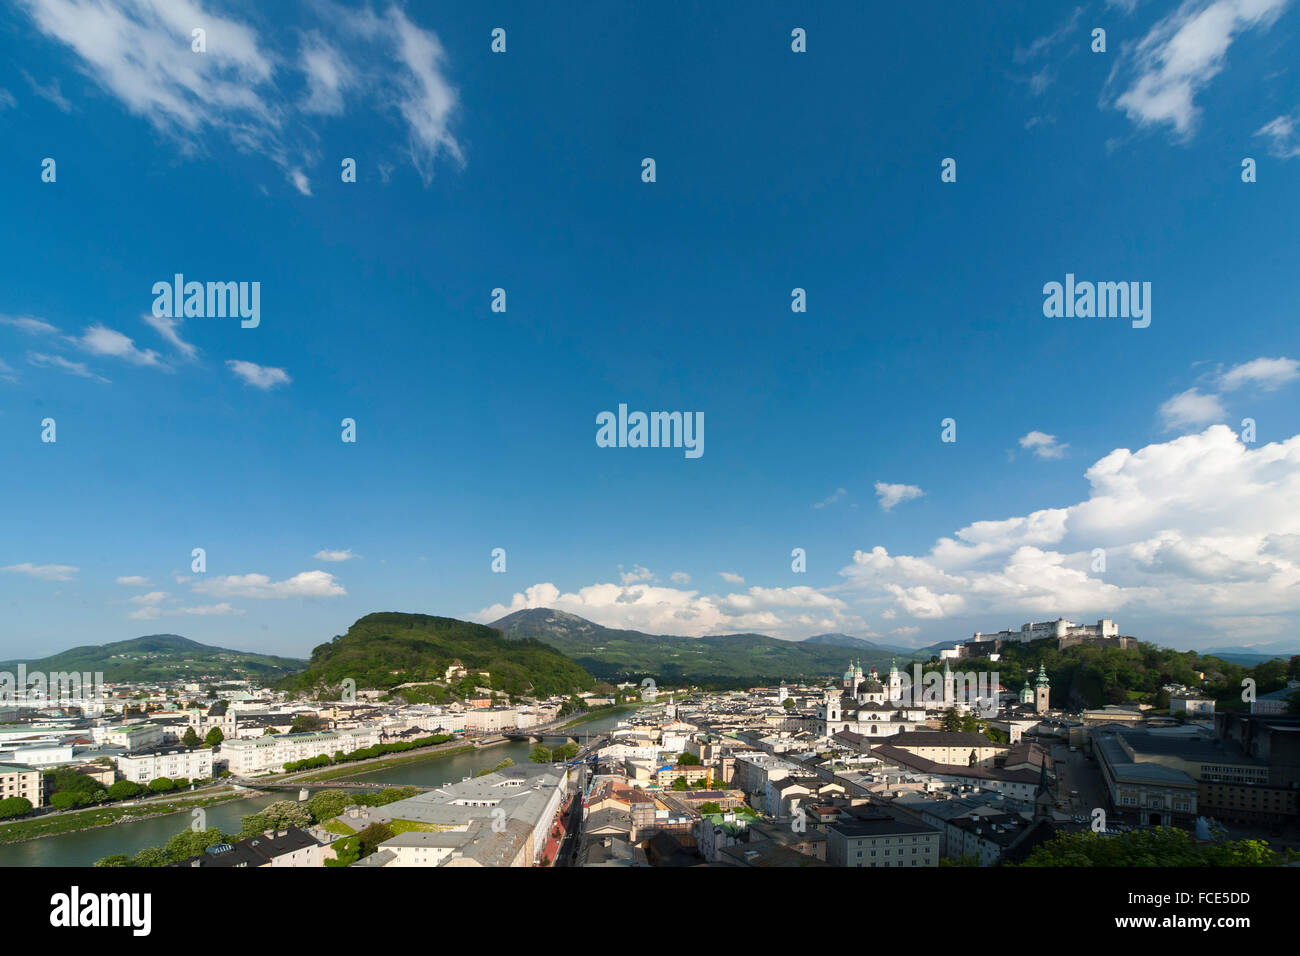 Overlooking the old town and Hohensalzburg Fortress, the historic center of the city of Salzburg Stock Photo